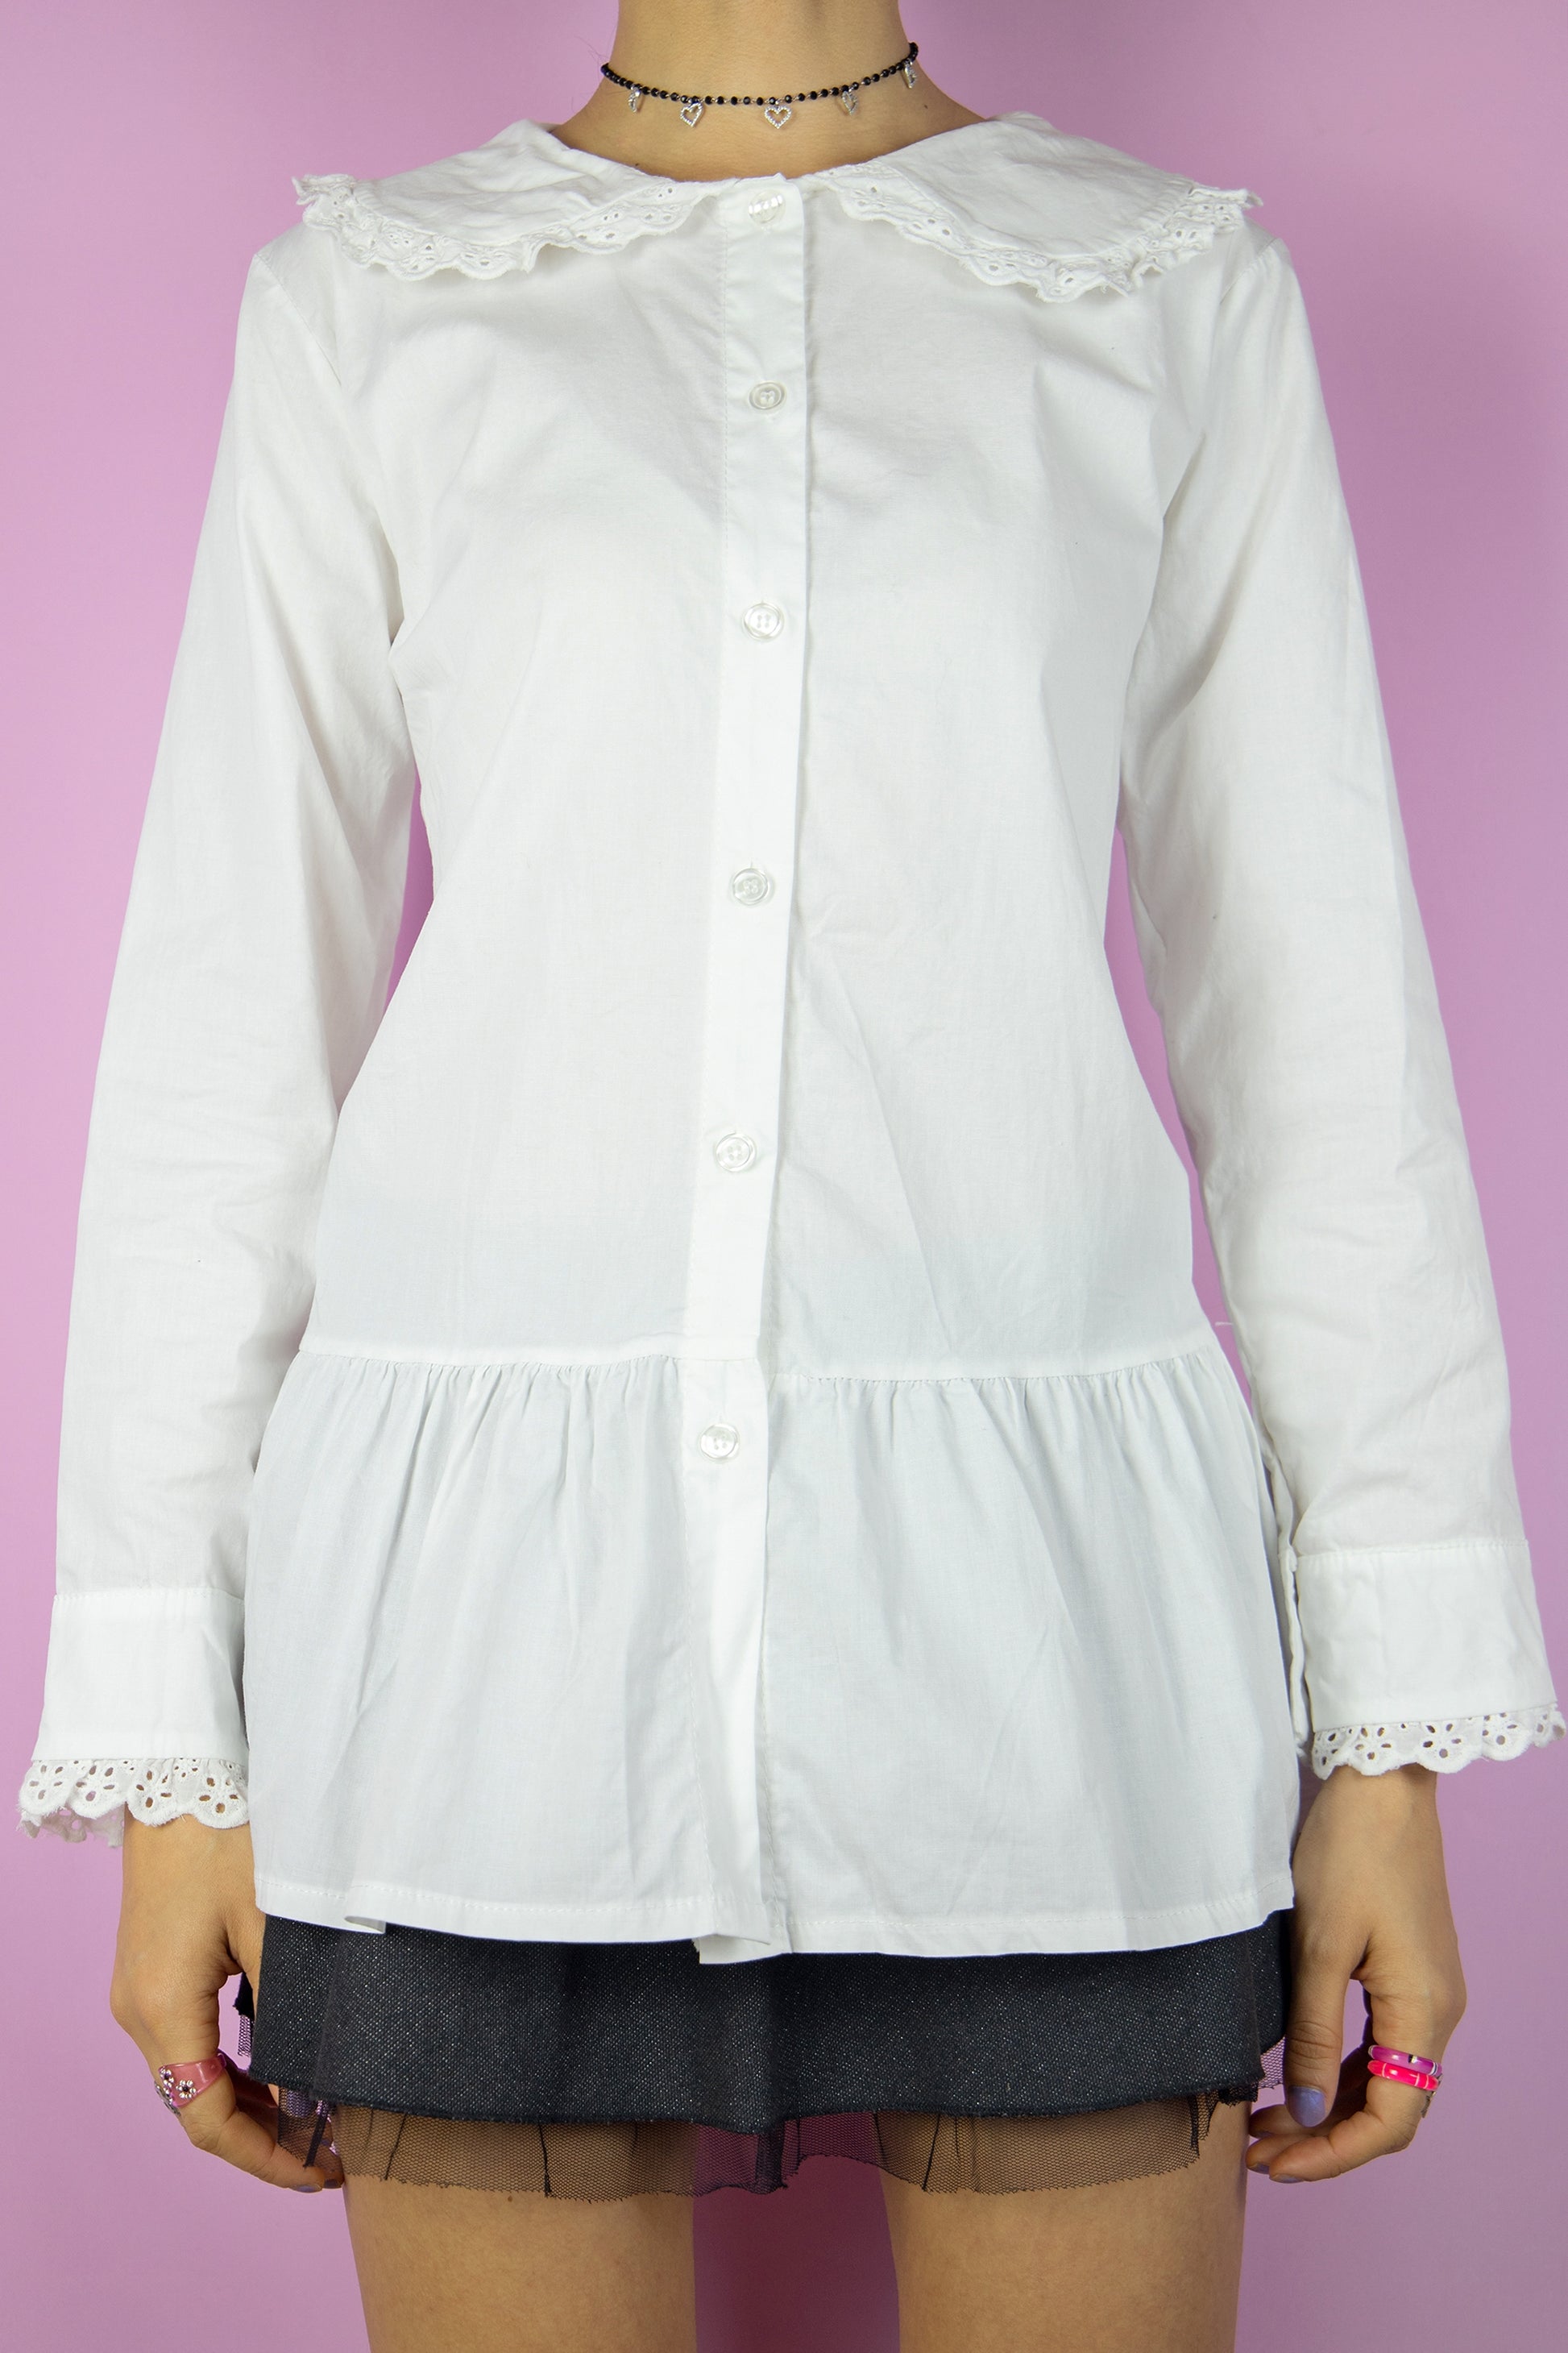 The Y2K White Big Collar Blouse is a vintage oversized collar shirt with buttons, ruffle hem, and lace trim. Cottage prairie 2000s preppy office coquette blouse.